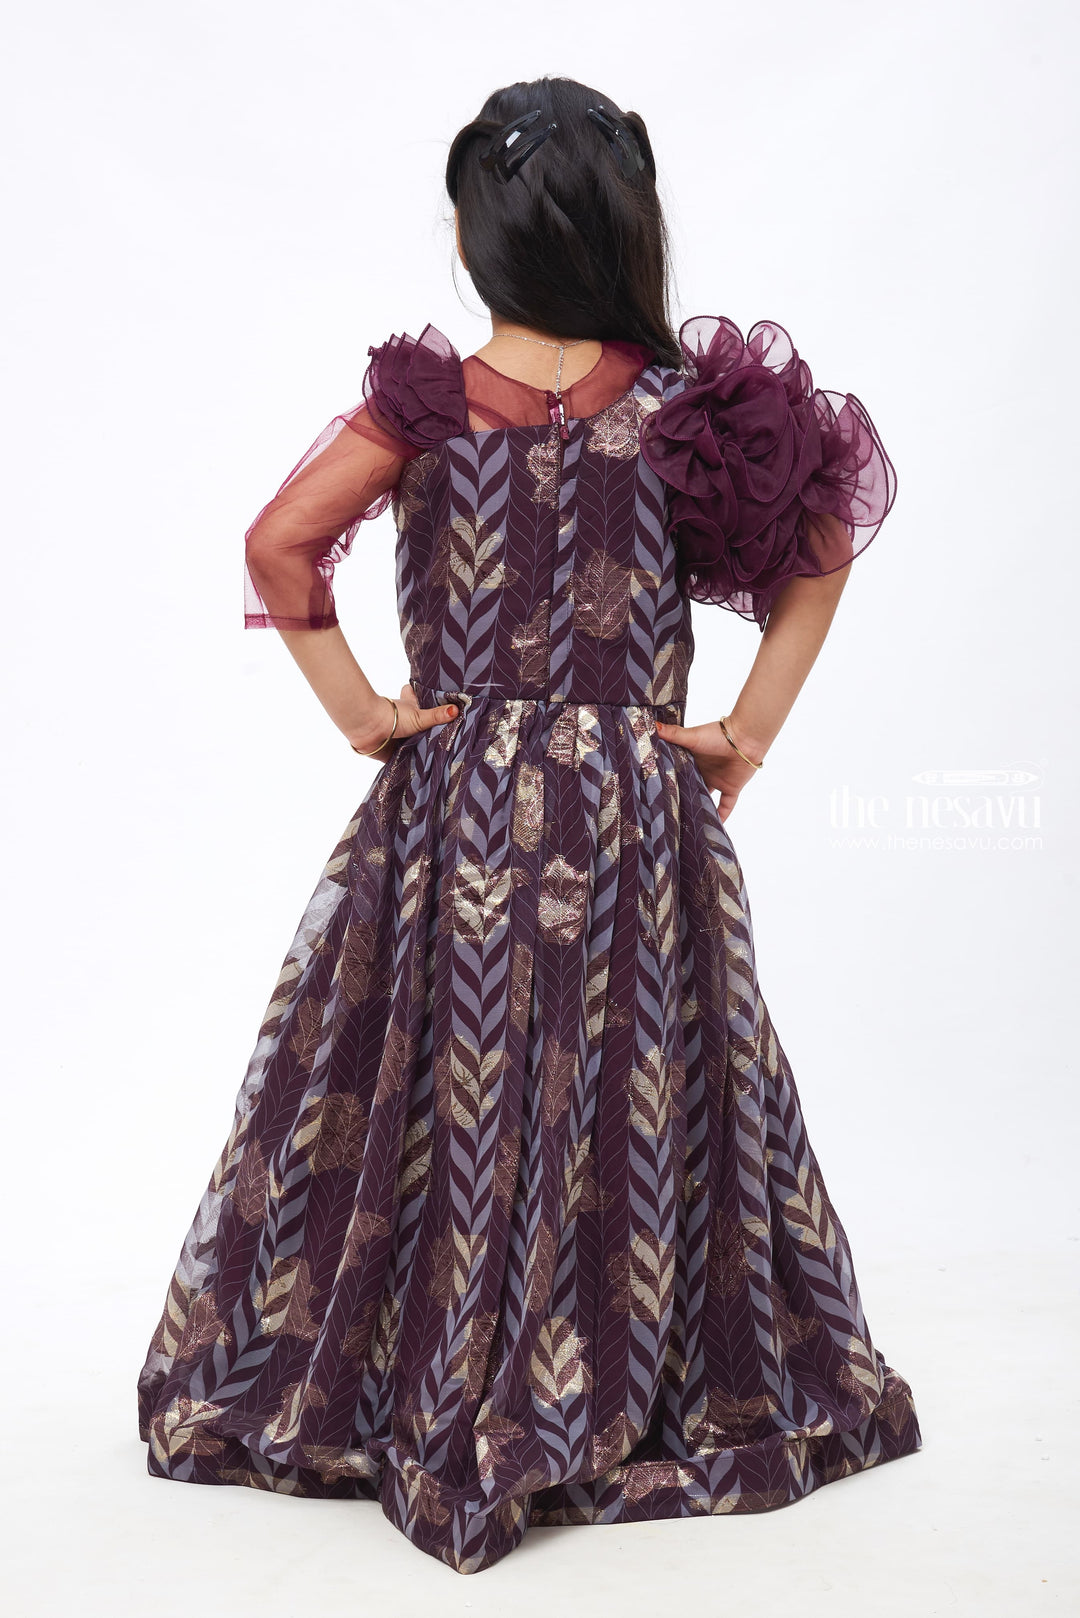 The Nesavu Girls Party Gown Regal Radiance: Mirror Embroidered with Ruffled Purple Party Gown for Girls Nesavu Deep Purple Gown with Mirror Embroidery | Luxurious Party Ensemble for Girls | The Nesavu